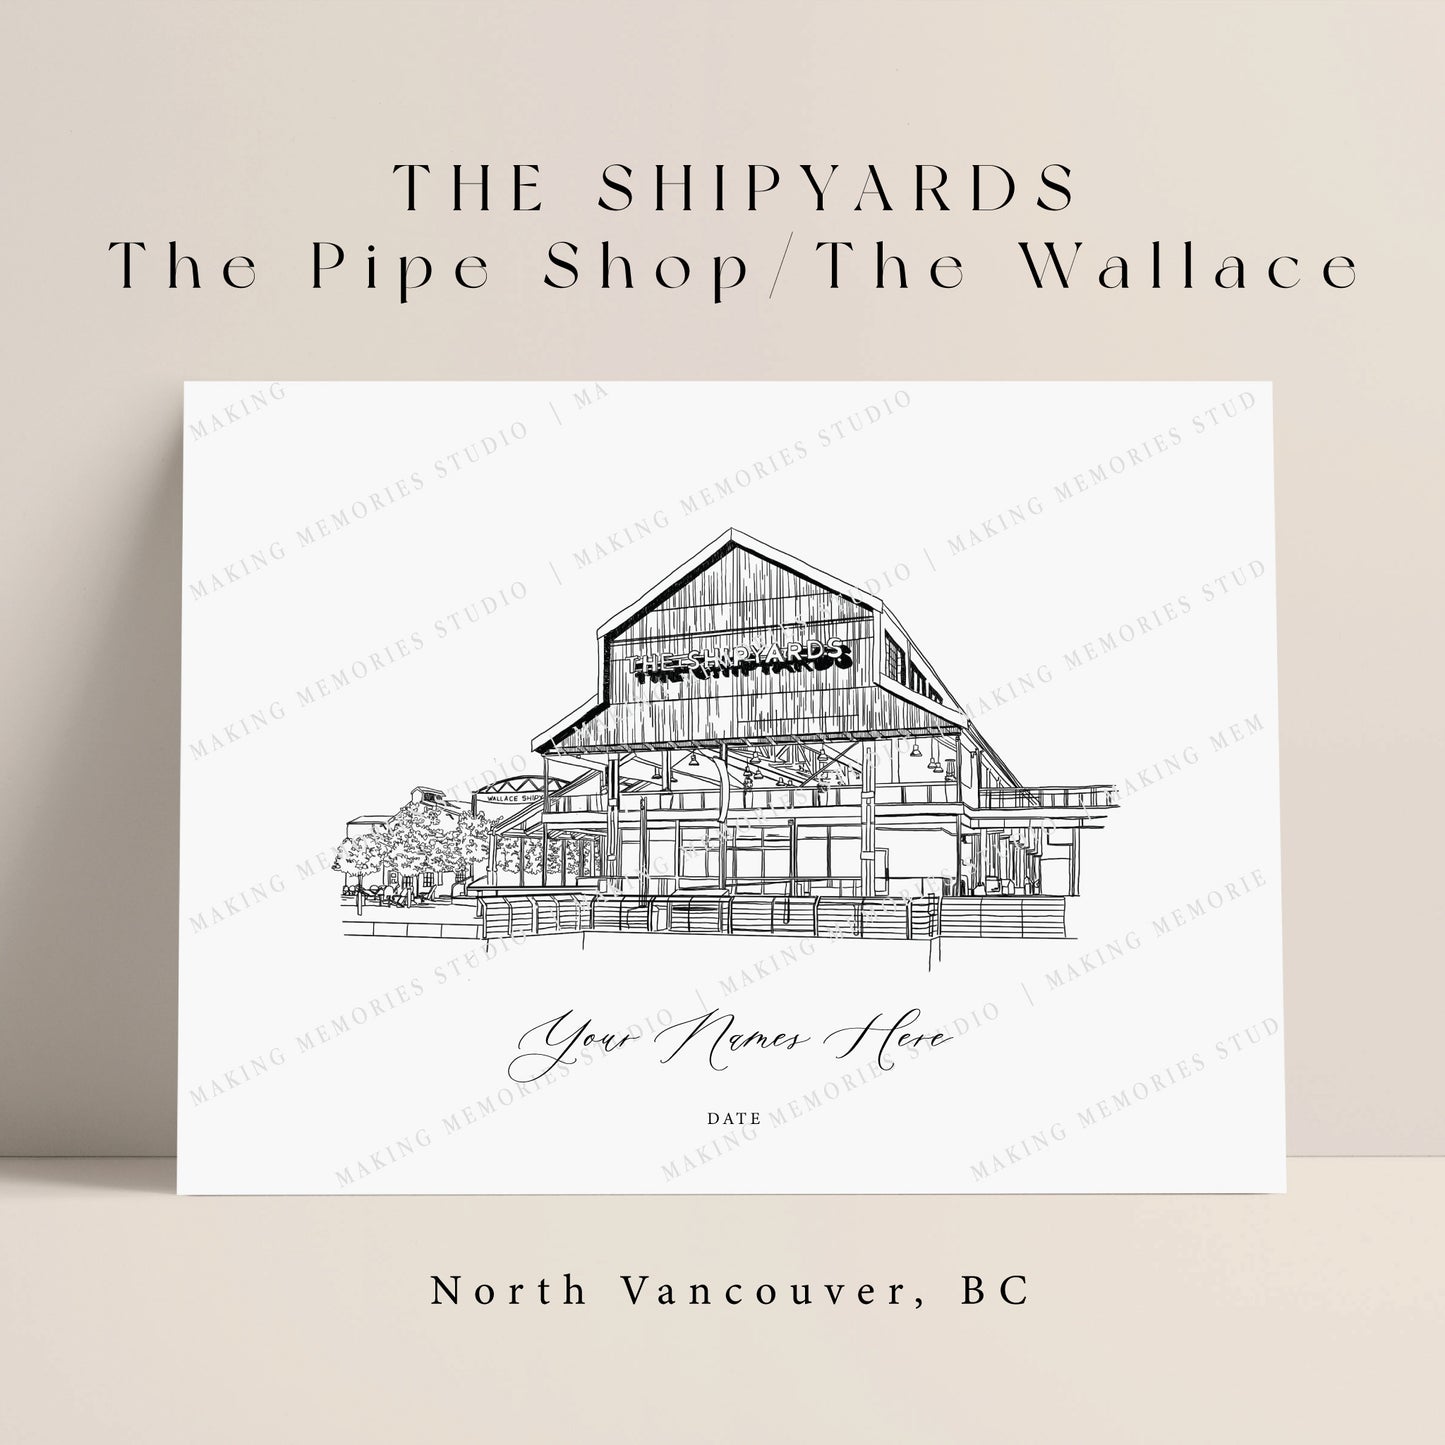 The Shipyards / The Pipeshop / The Wallace